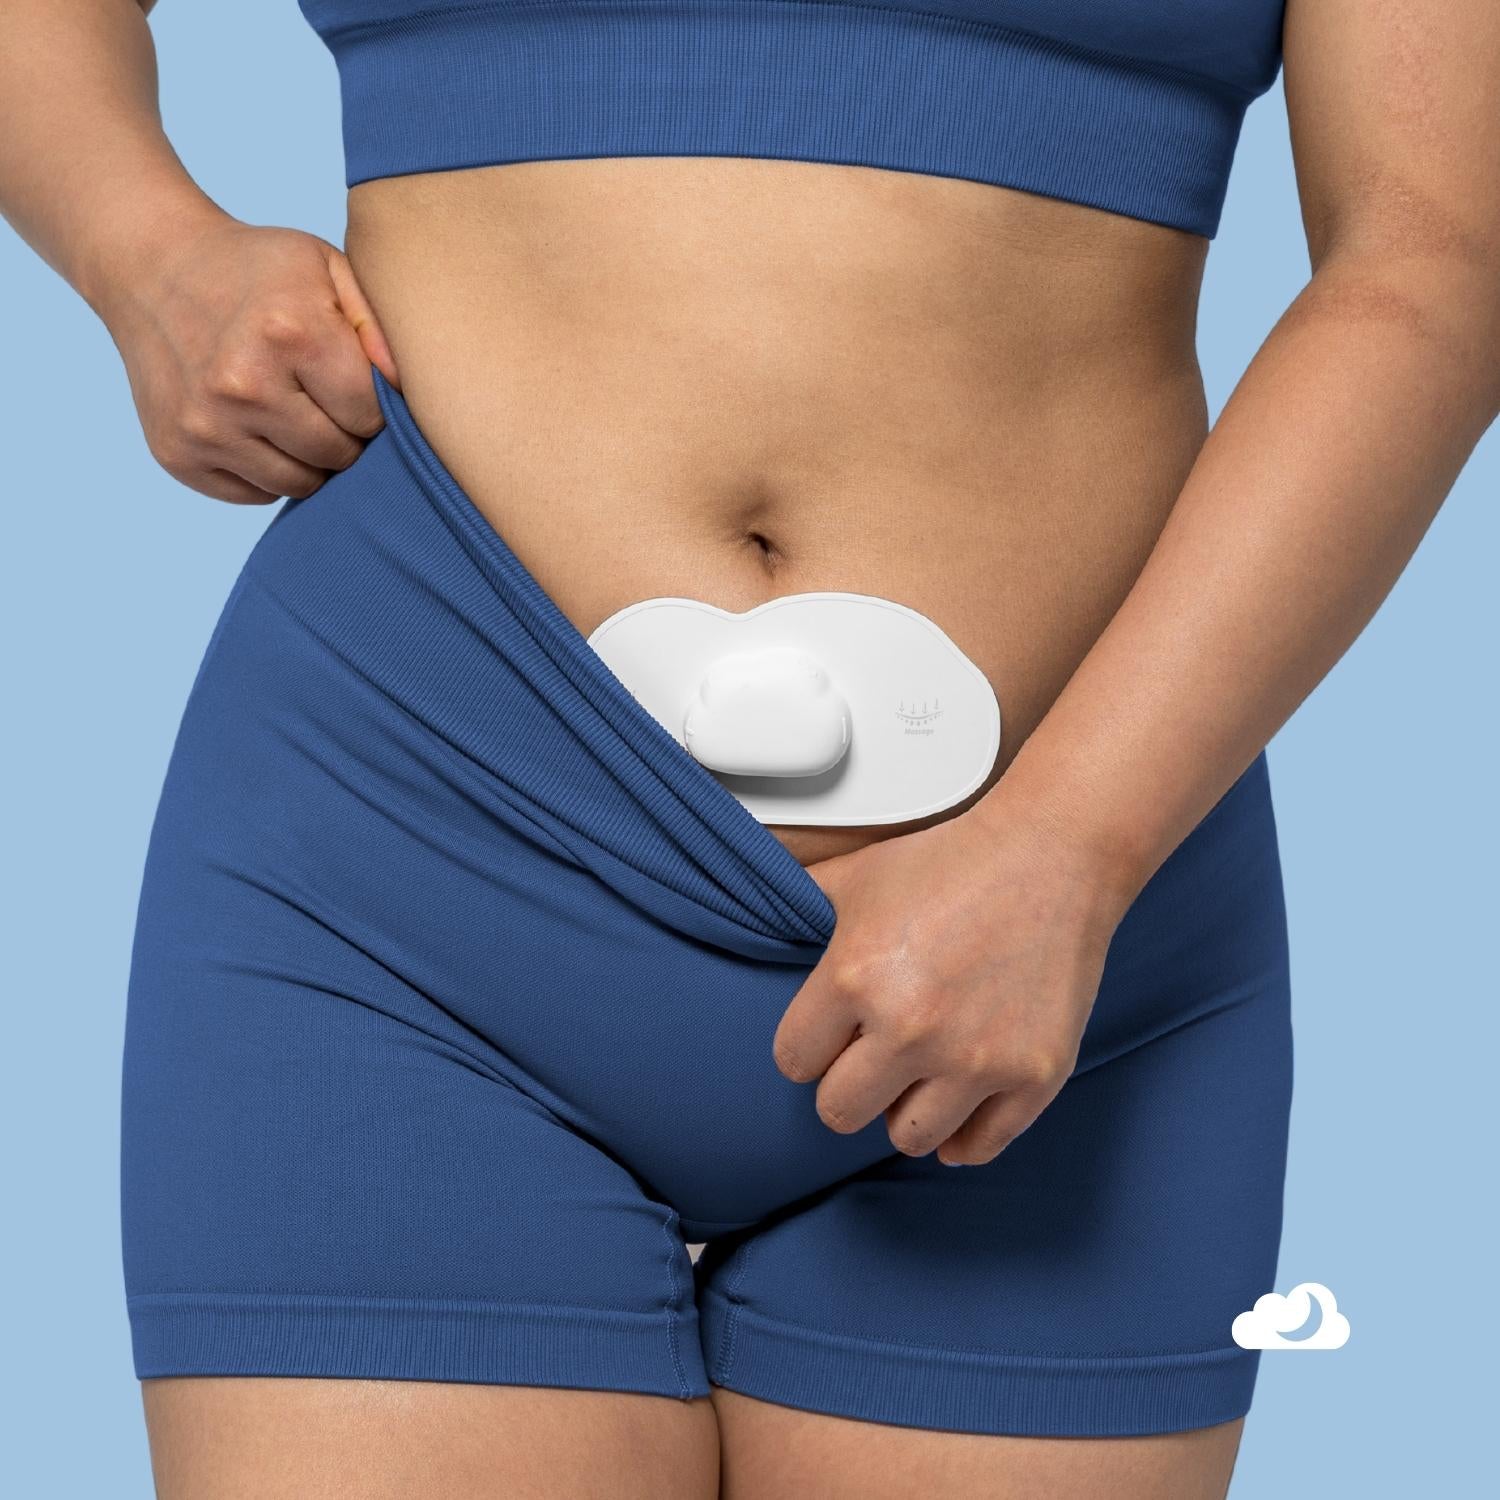 Monthli 2-In-1 Instant Period Pain Relief Device